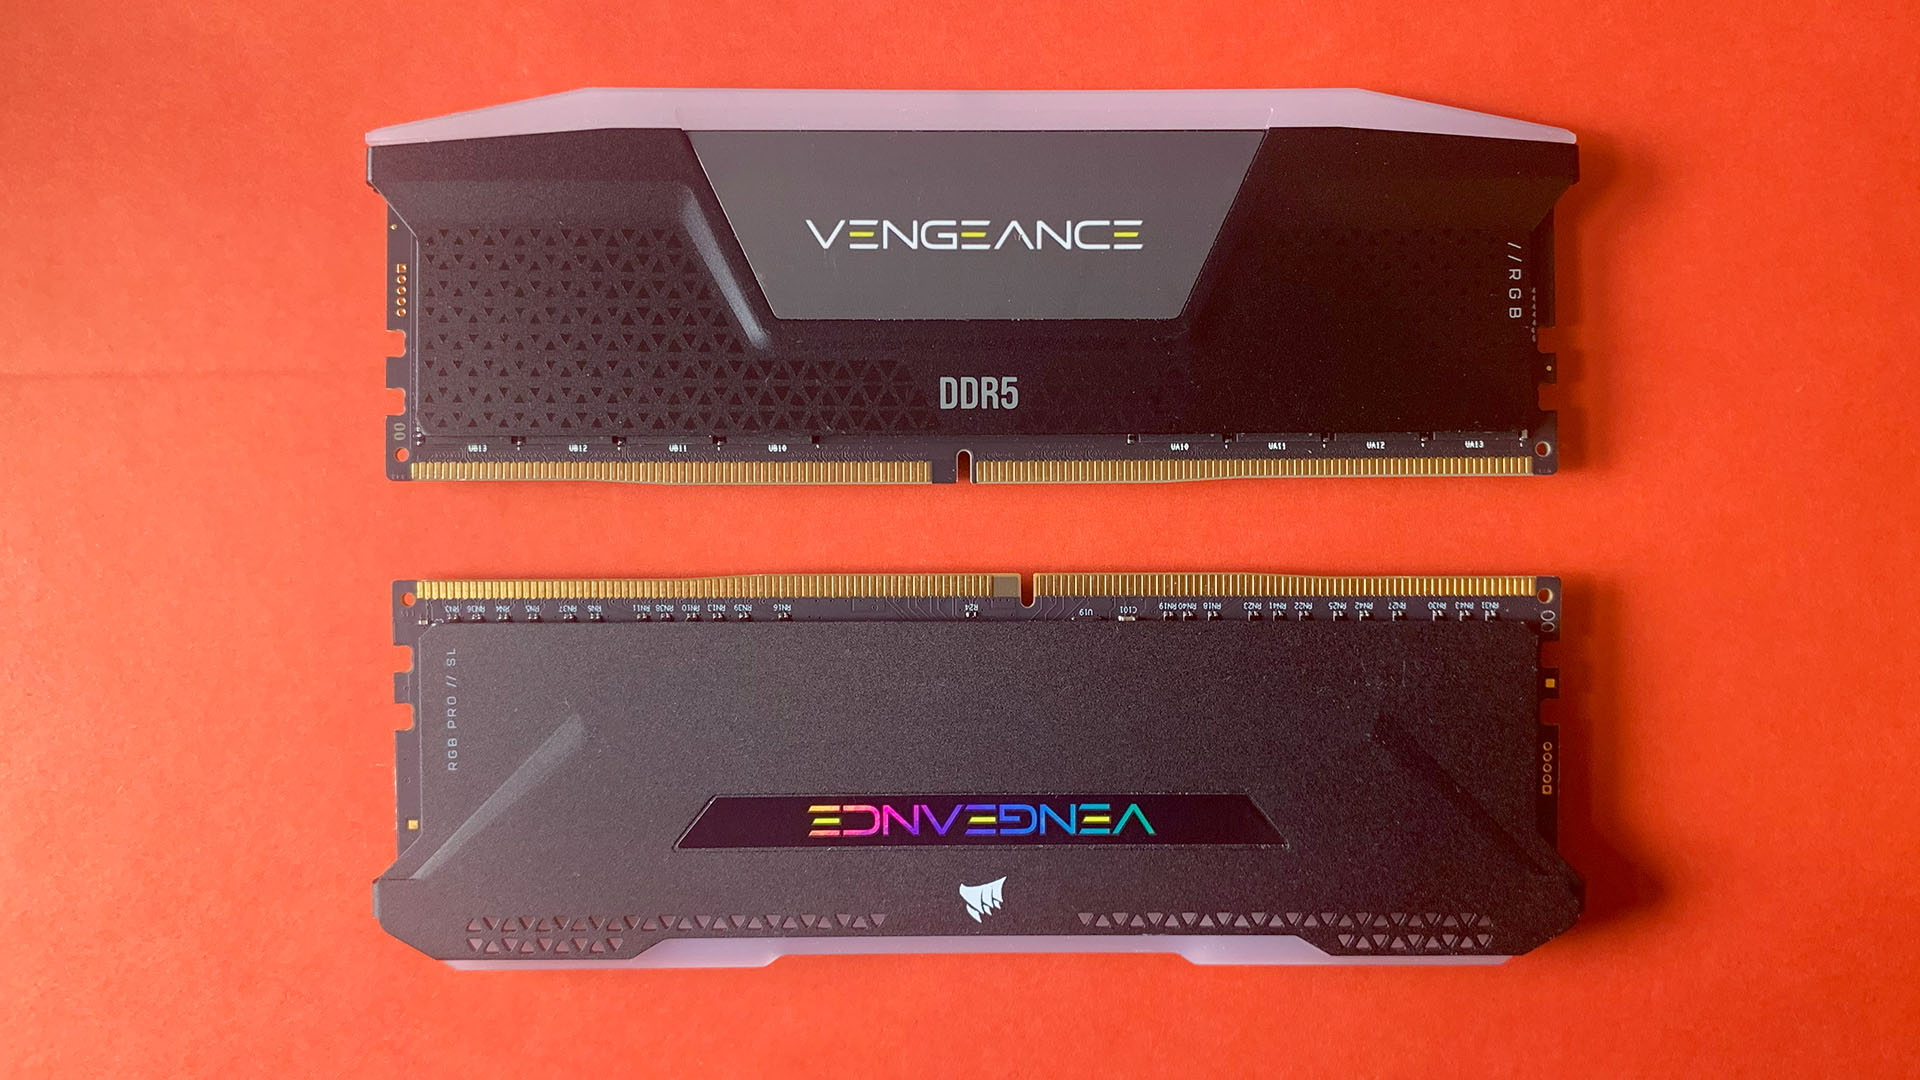 DDR4 vs DDR5 – which RAM to buy for gaming